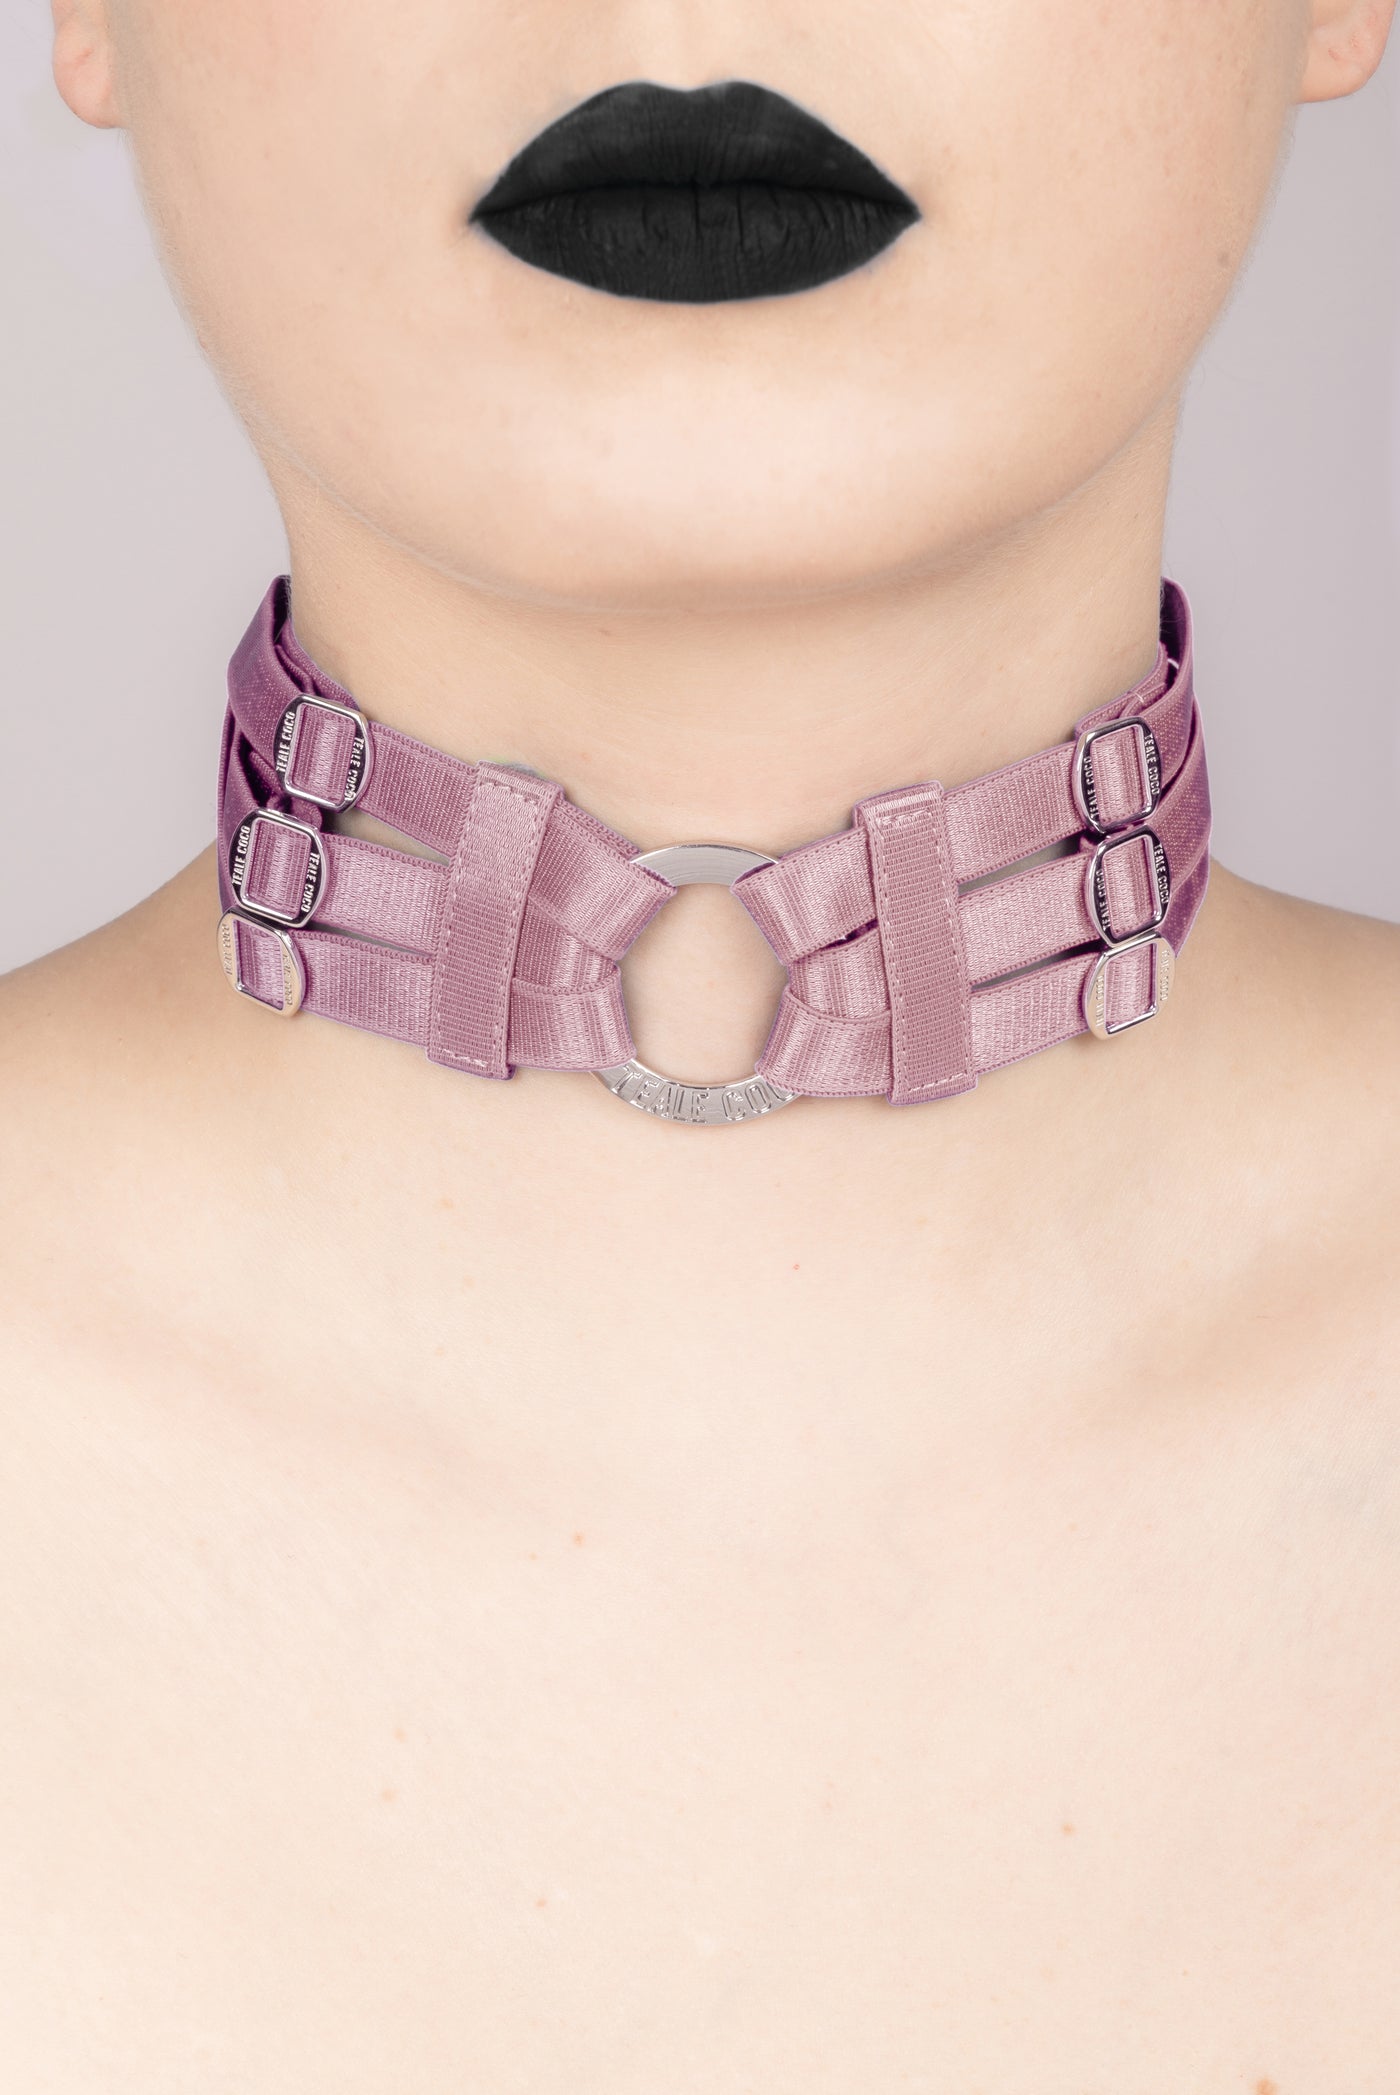 OH O ring choker - Dusted Pink